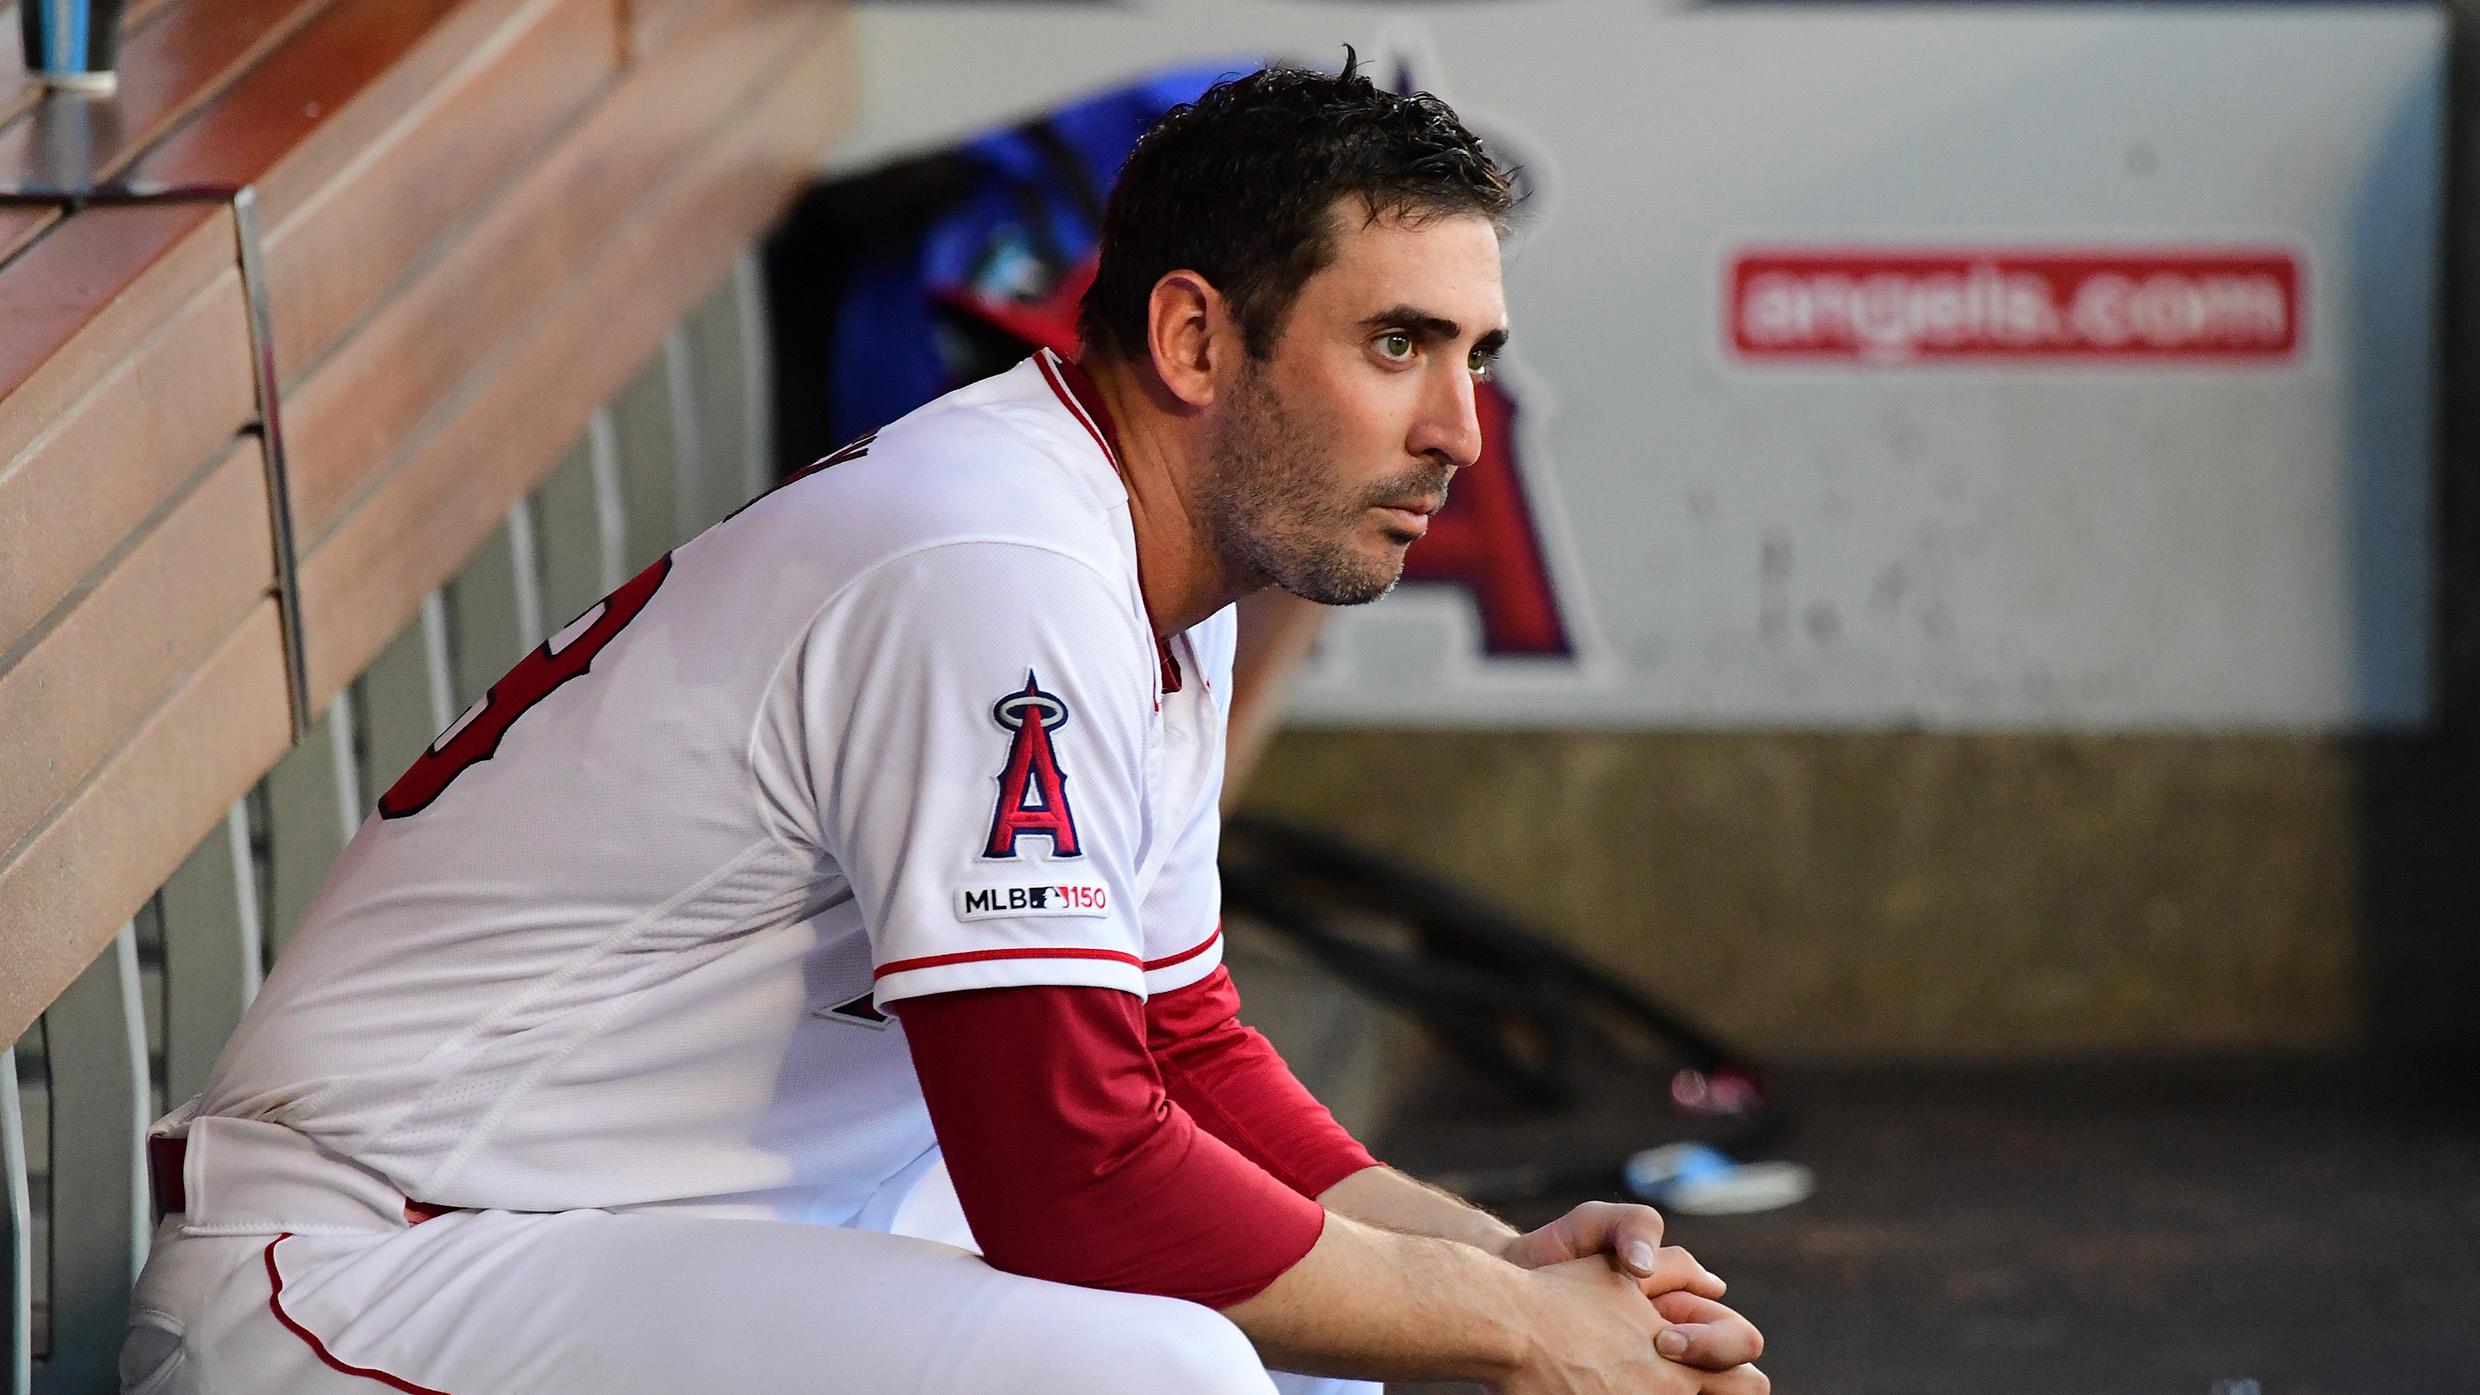 Jul 18, 2019; Anaheim, CA, USA; Los Angeles Angels starting pitcher Matt Harvey (33) sits in the dugout during the third inning against the Houston Astros at Angel Stadium of Anaheim. / Jayne Kamin-Oncea-USA TODAY Sports